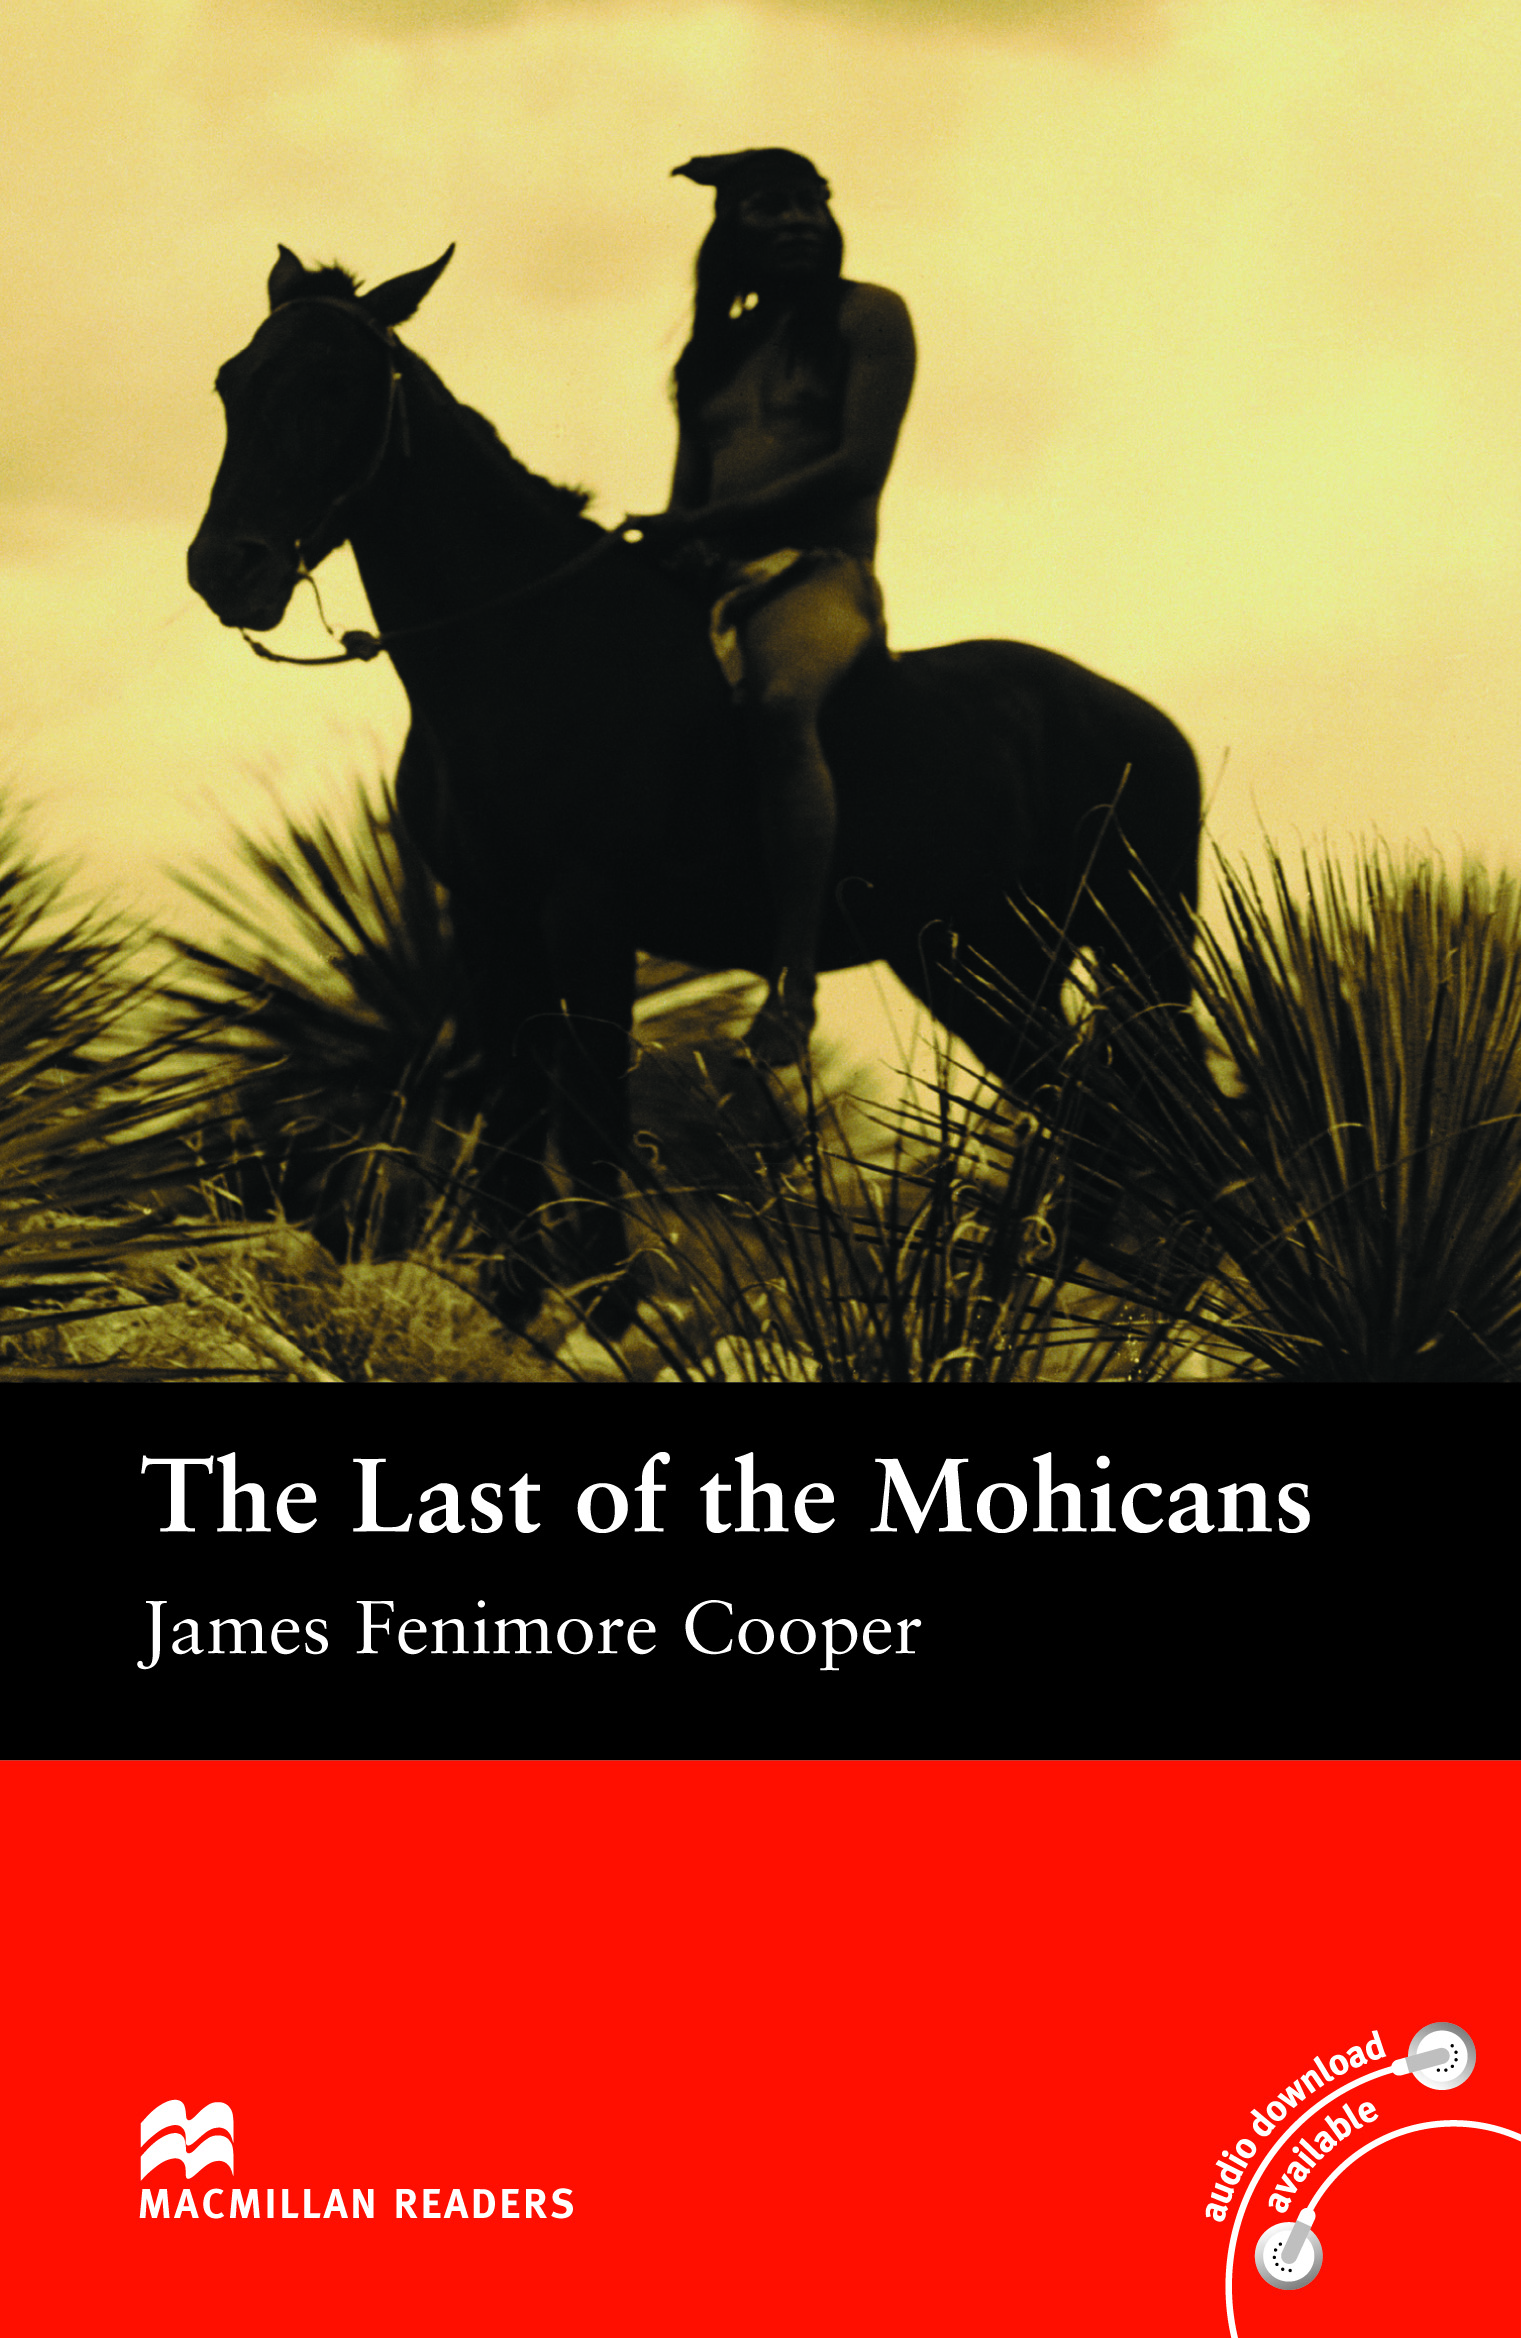 The last book i read was. The last of the Mohicans James Fenimore Cooper. The last of the Mohicans Macmillan. The last of the Mohicans book. The last of the Mohicans Macmillan фото.